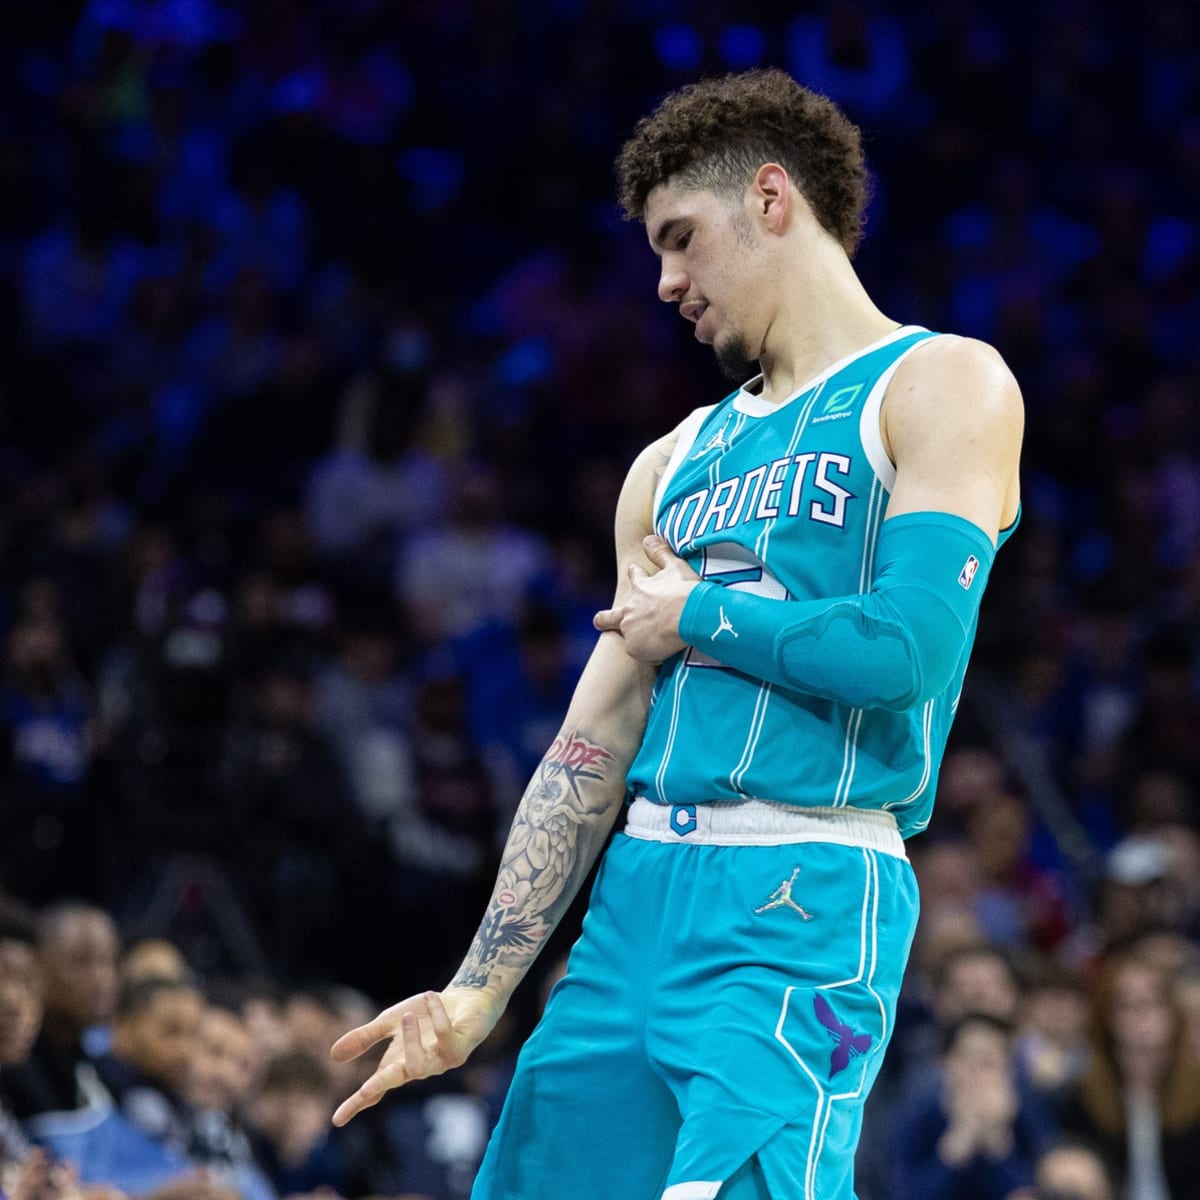 LaMelo Ball changing jersey number before third NBA season